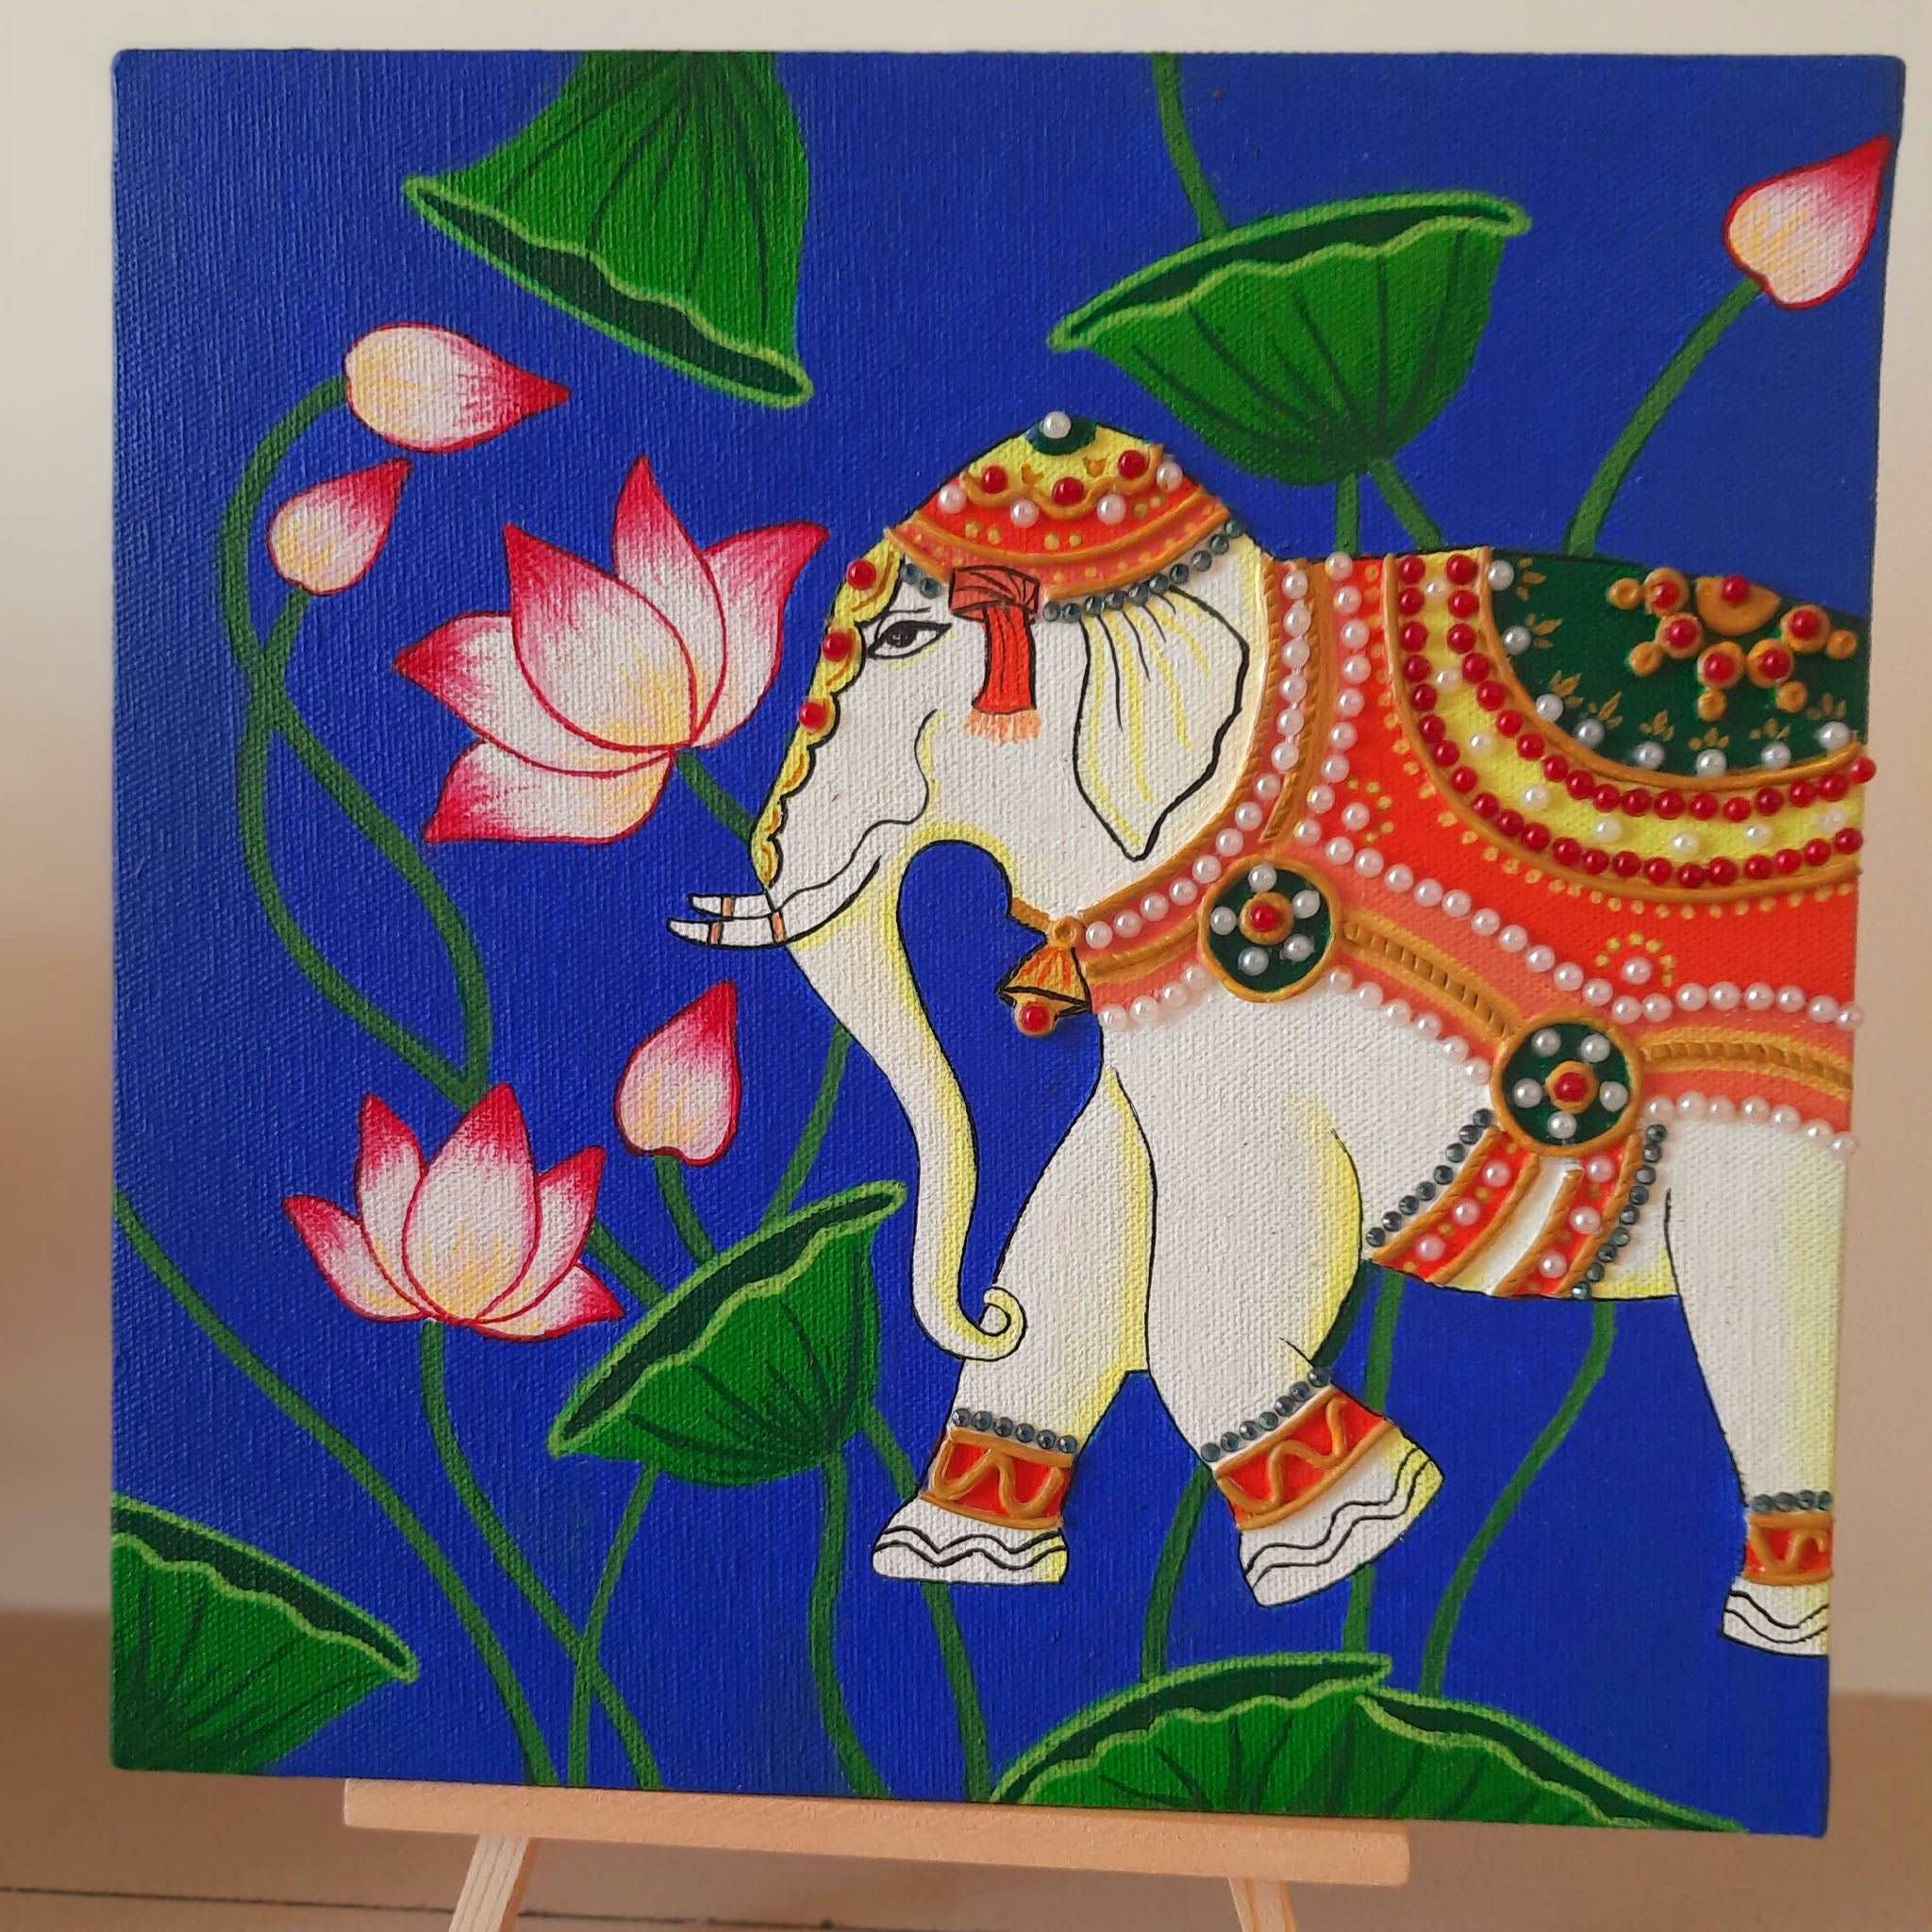 Pearl hand painted Pichwai Elephant painting art on Canvas 10 x 10 gaonkasaman 5185 11877511 d85b 44d3 b2ae 128036843504